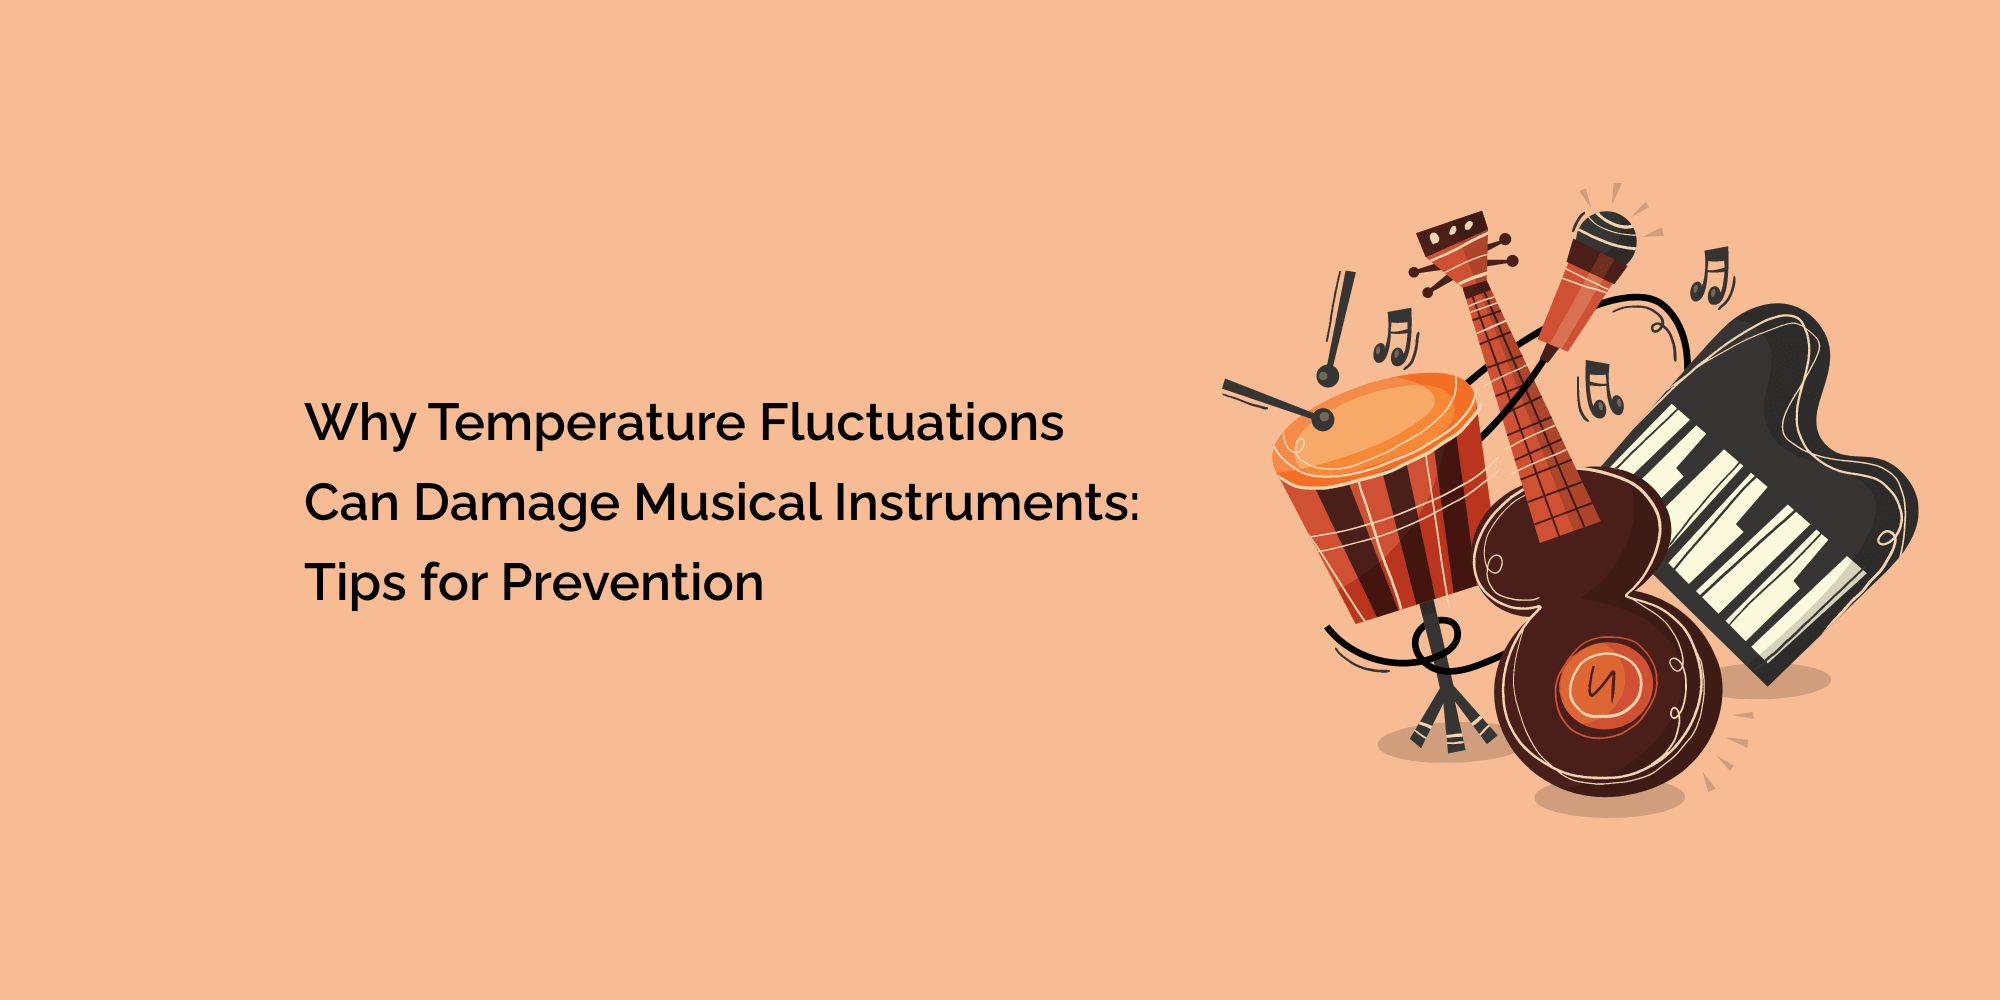 Why Temperature Fluctuations Can Damage Musical Instruments: Tips for Prevention